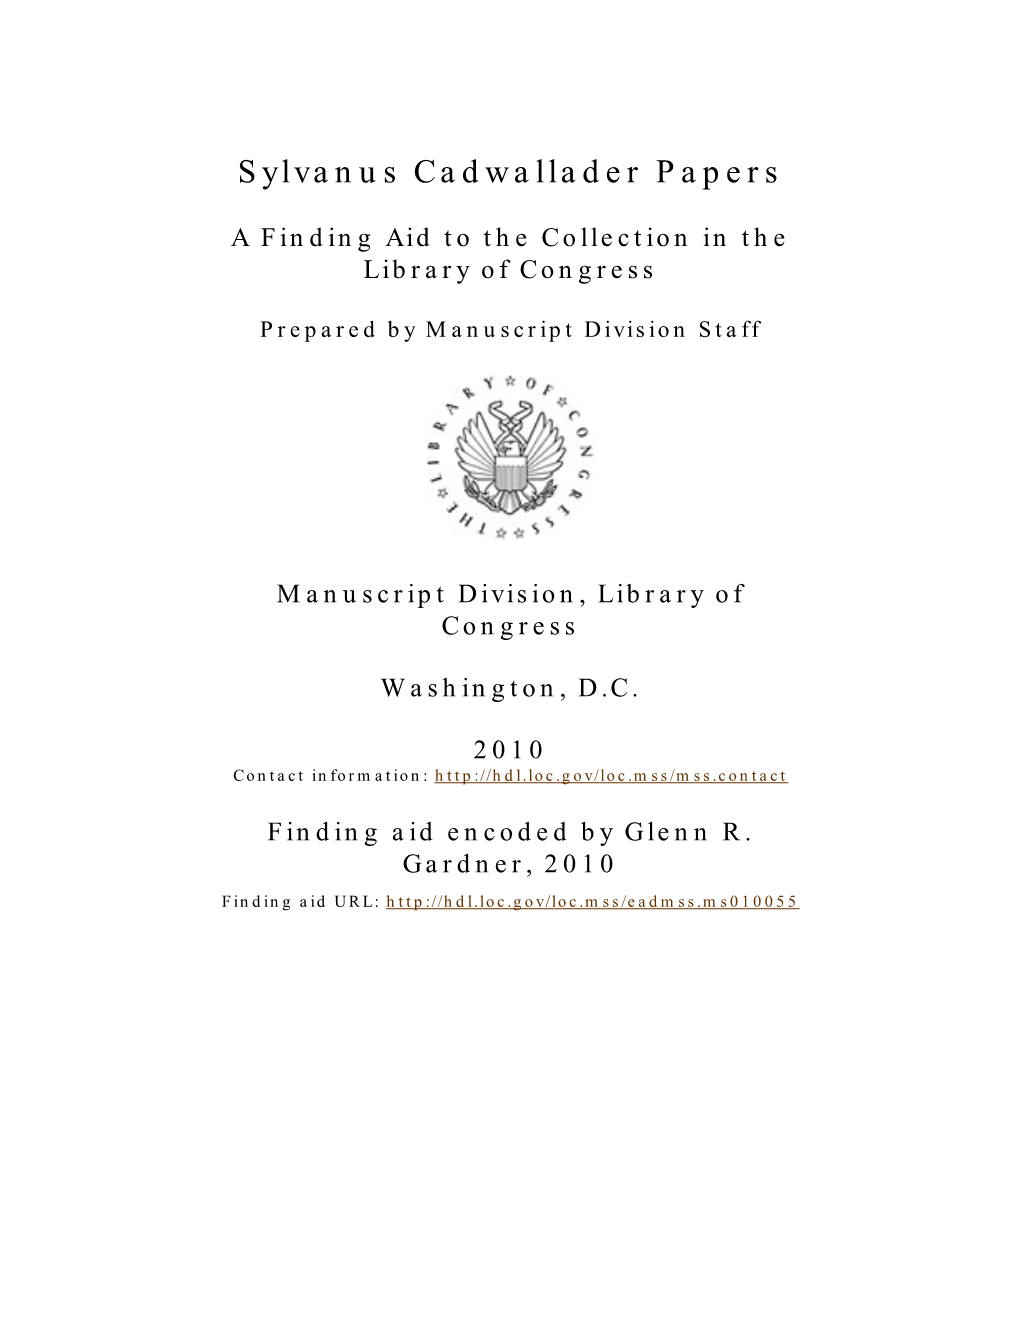 Sylvanus Cadwallader Papers [Finding Aid]. Library of Congress